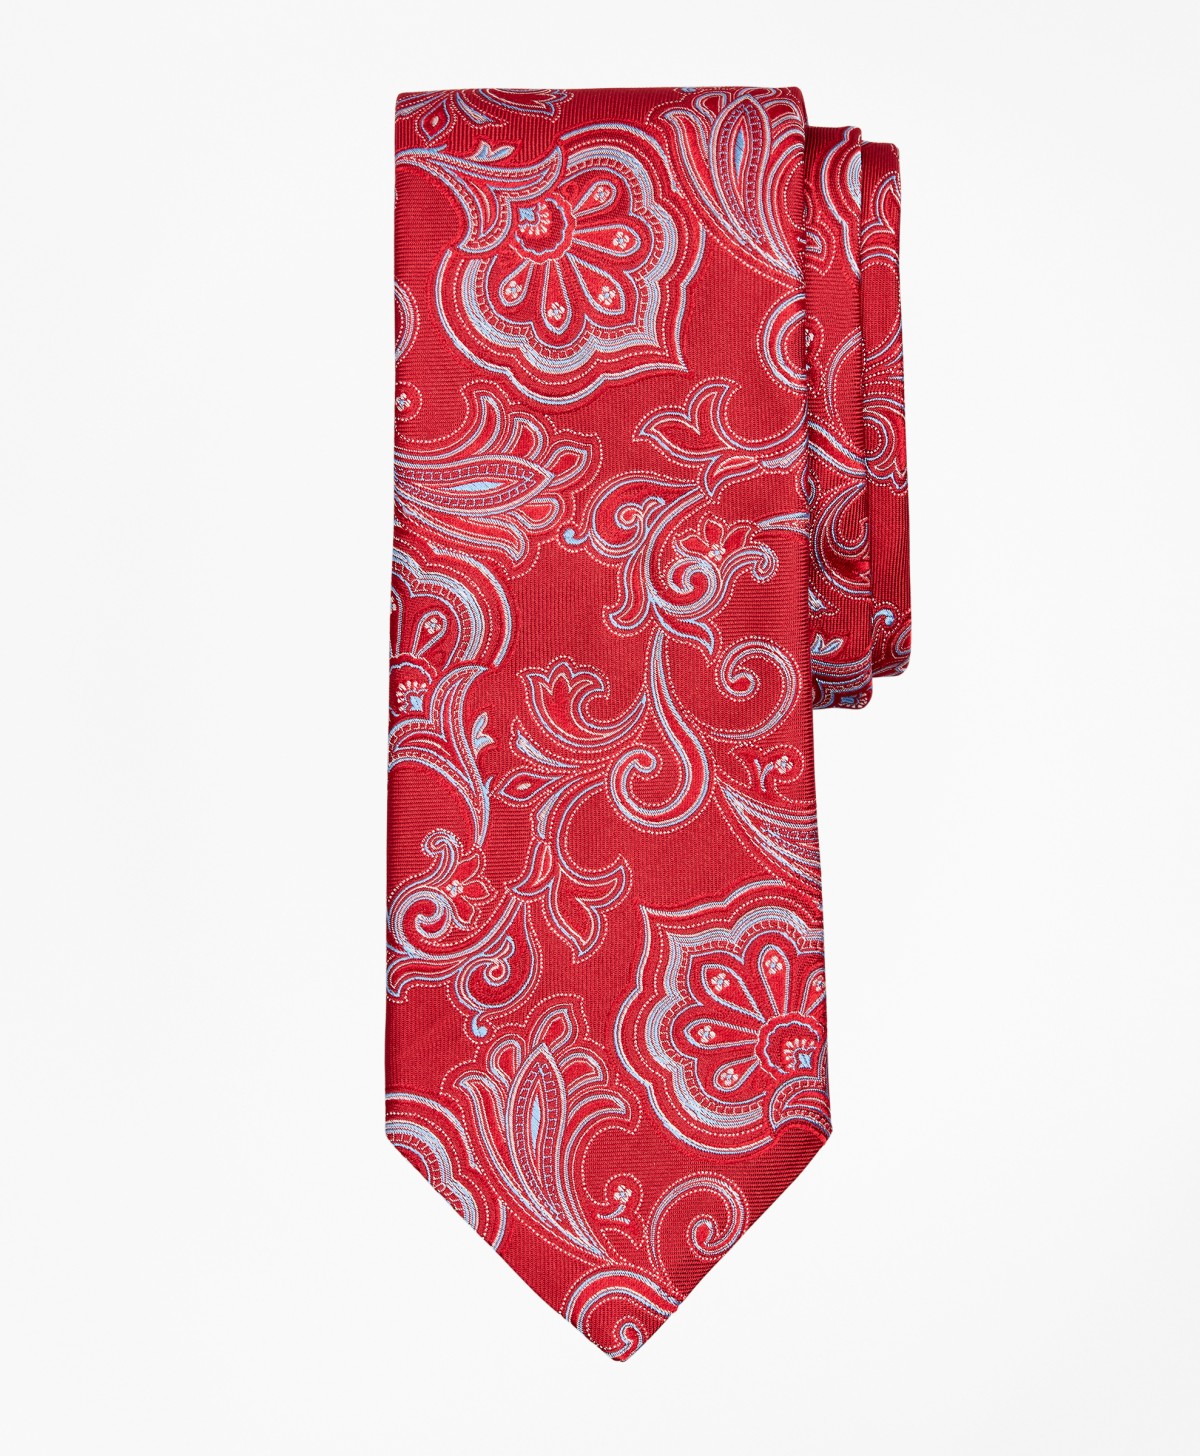 Dotted Paisley Tie